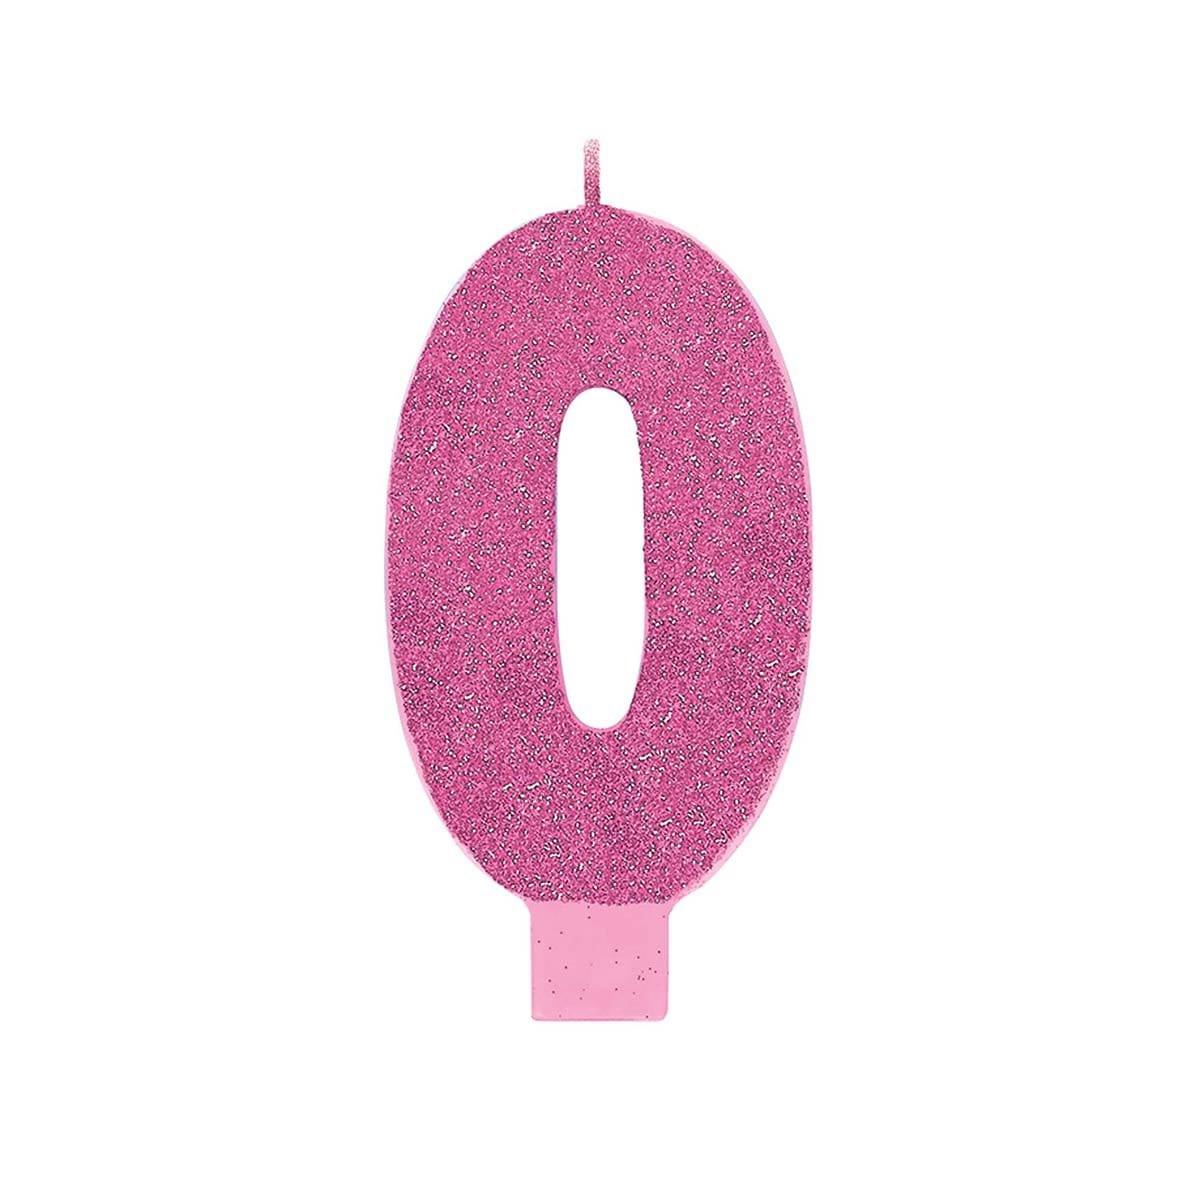 Buy Cake Supplies Large Num Glitter Candle #0 - Pink sold at Party Expert